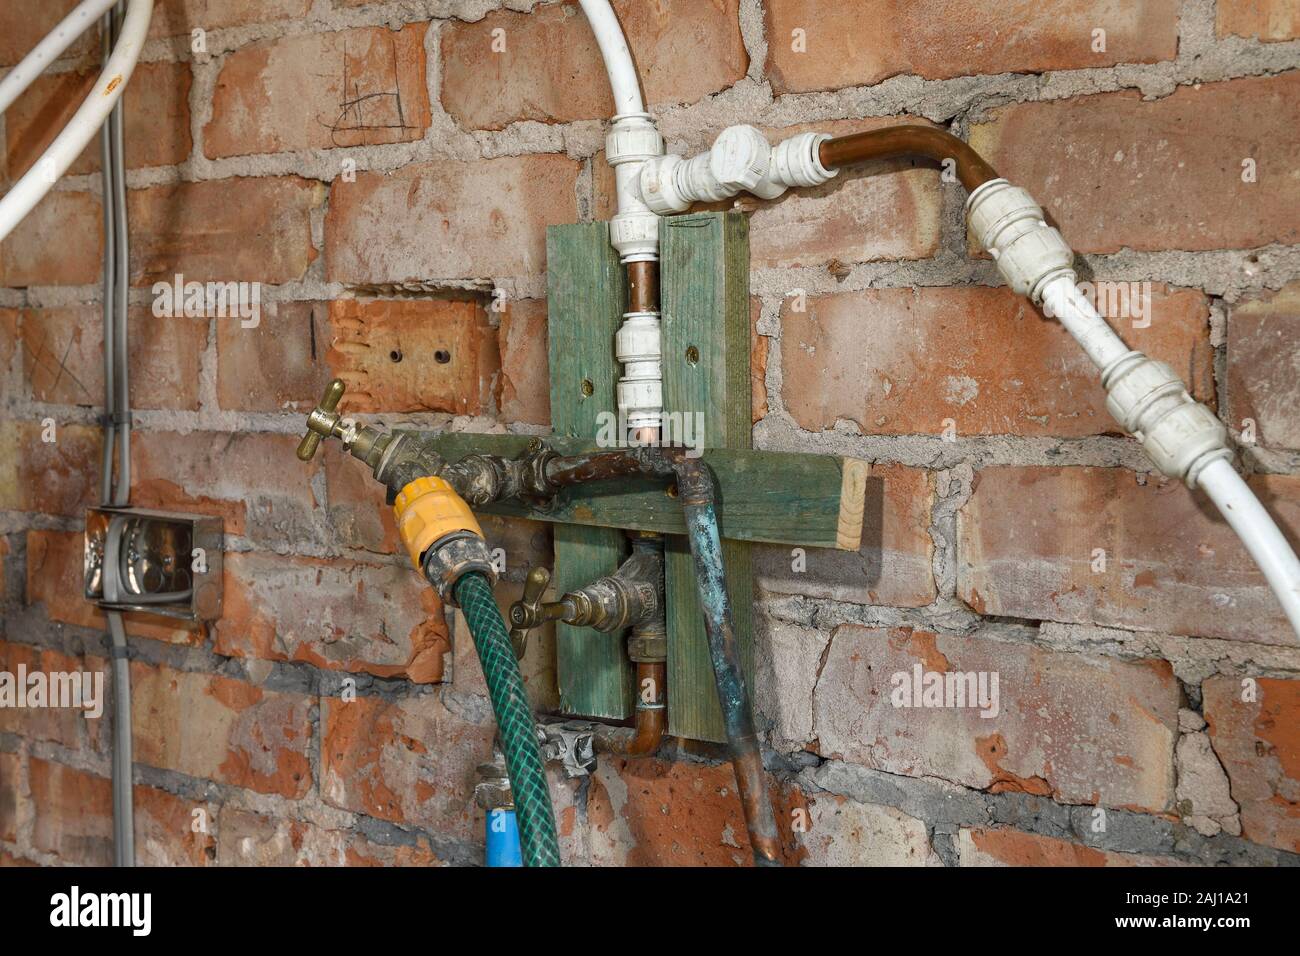 A complicated configuration of water pipes and taps on a UK building site Stock Photo